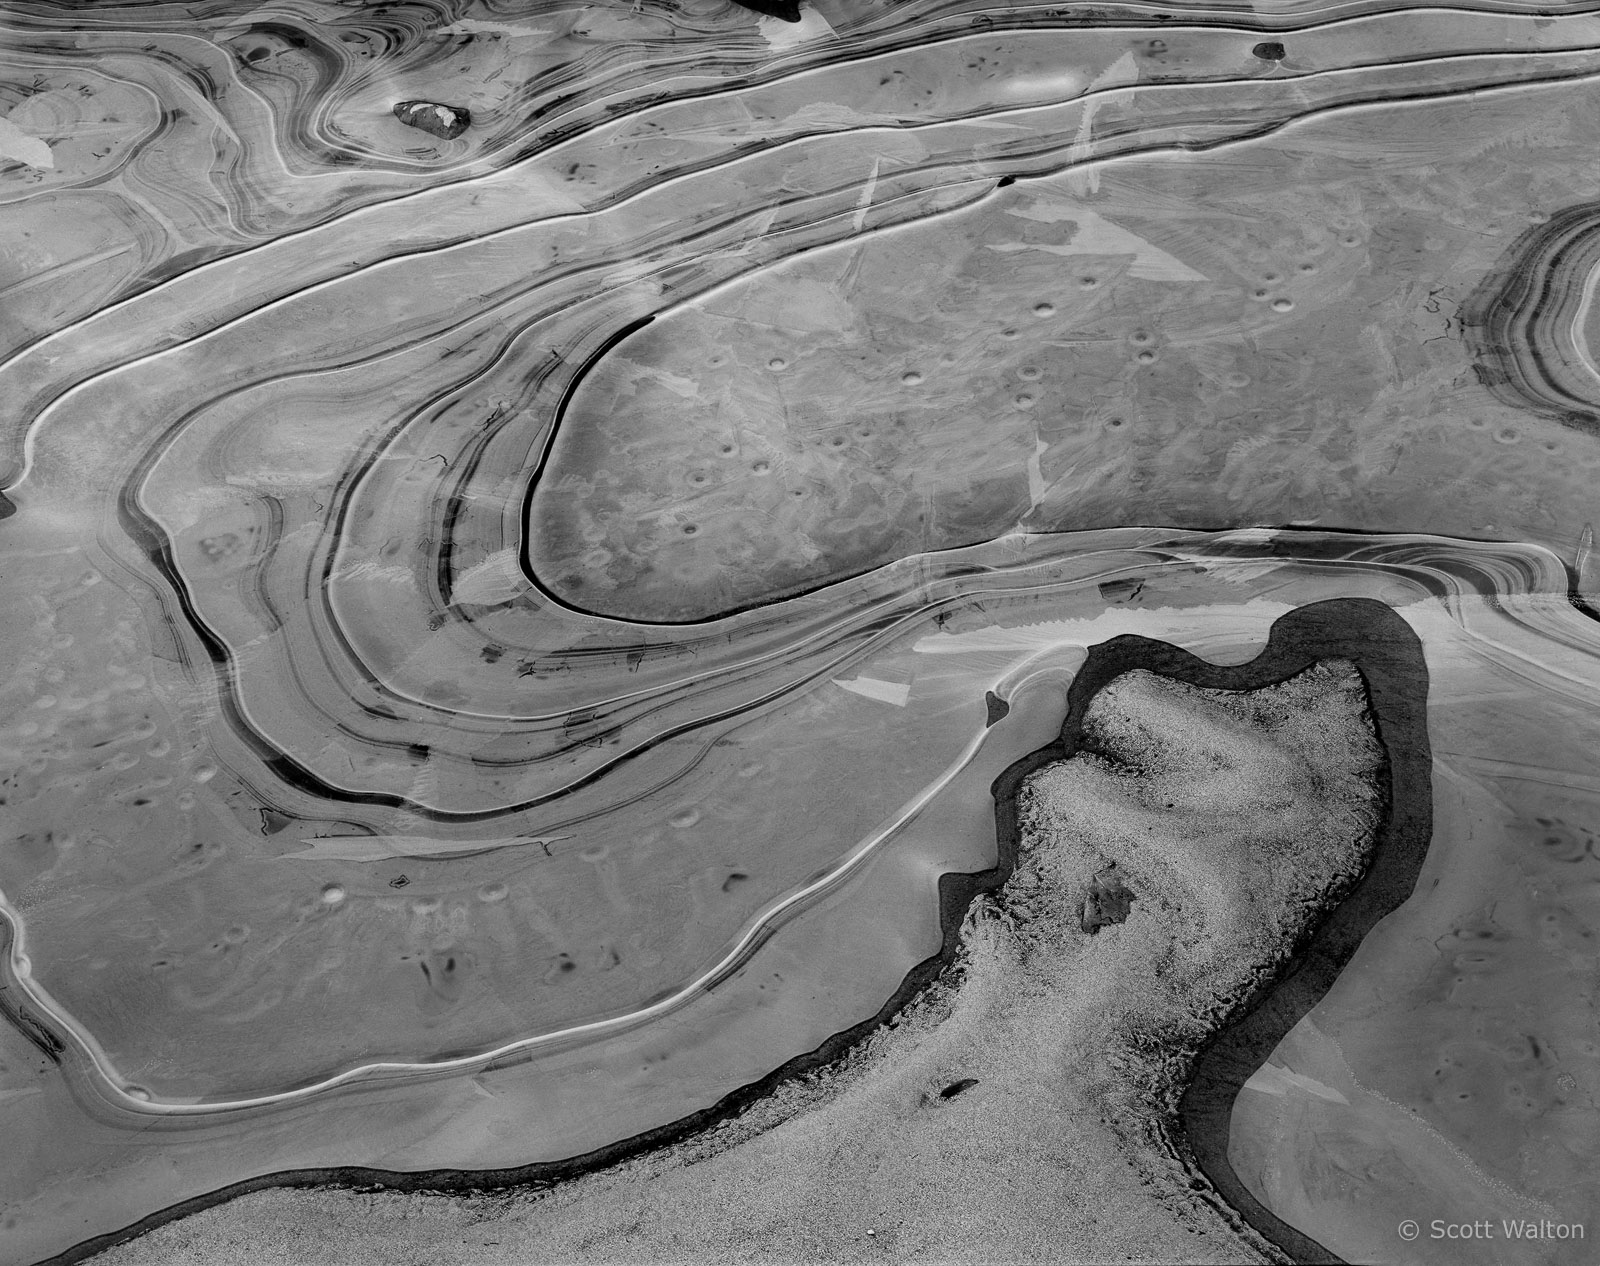 Zion-Washes-IceDetail-3-tmax100.jpg